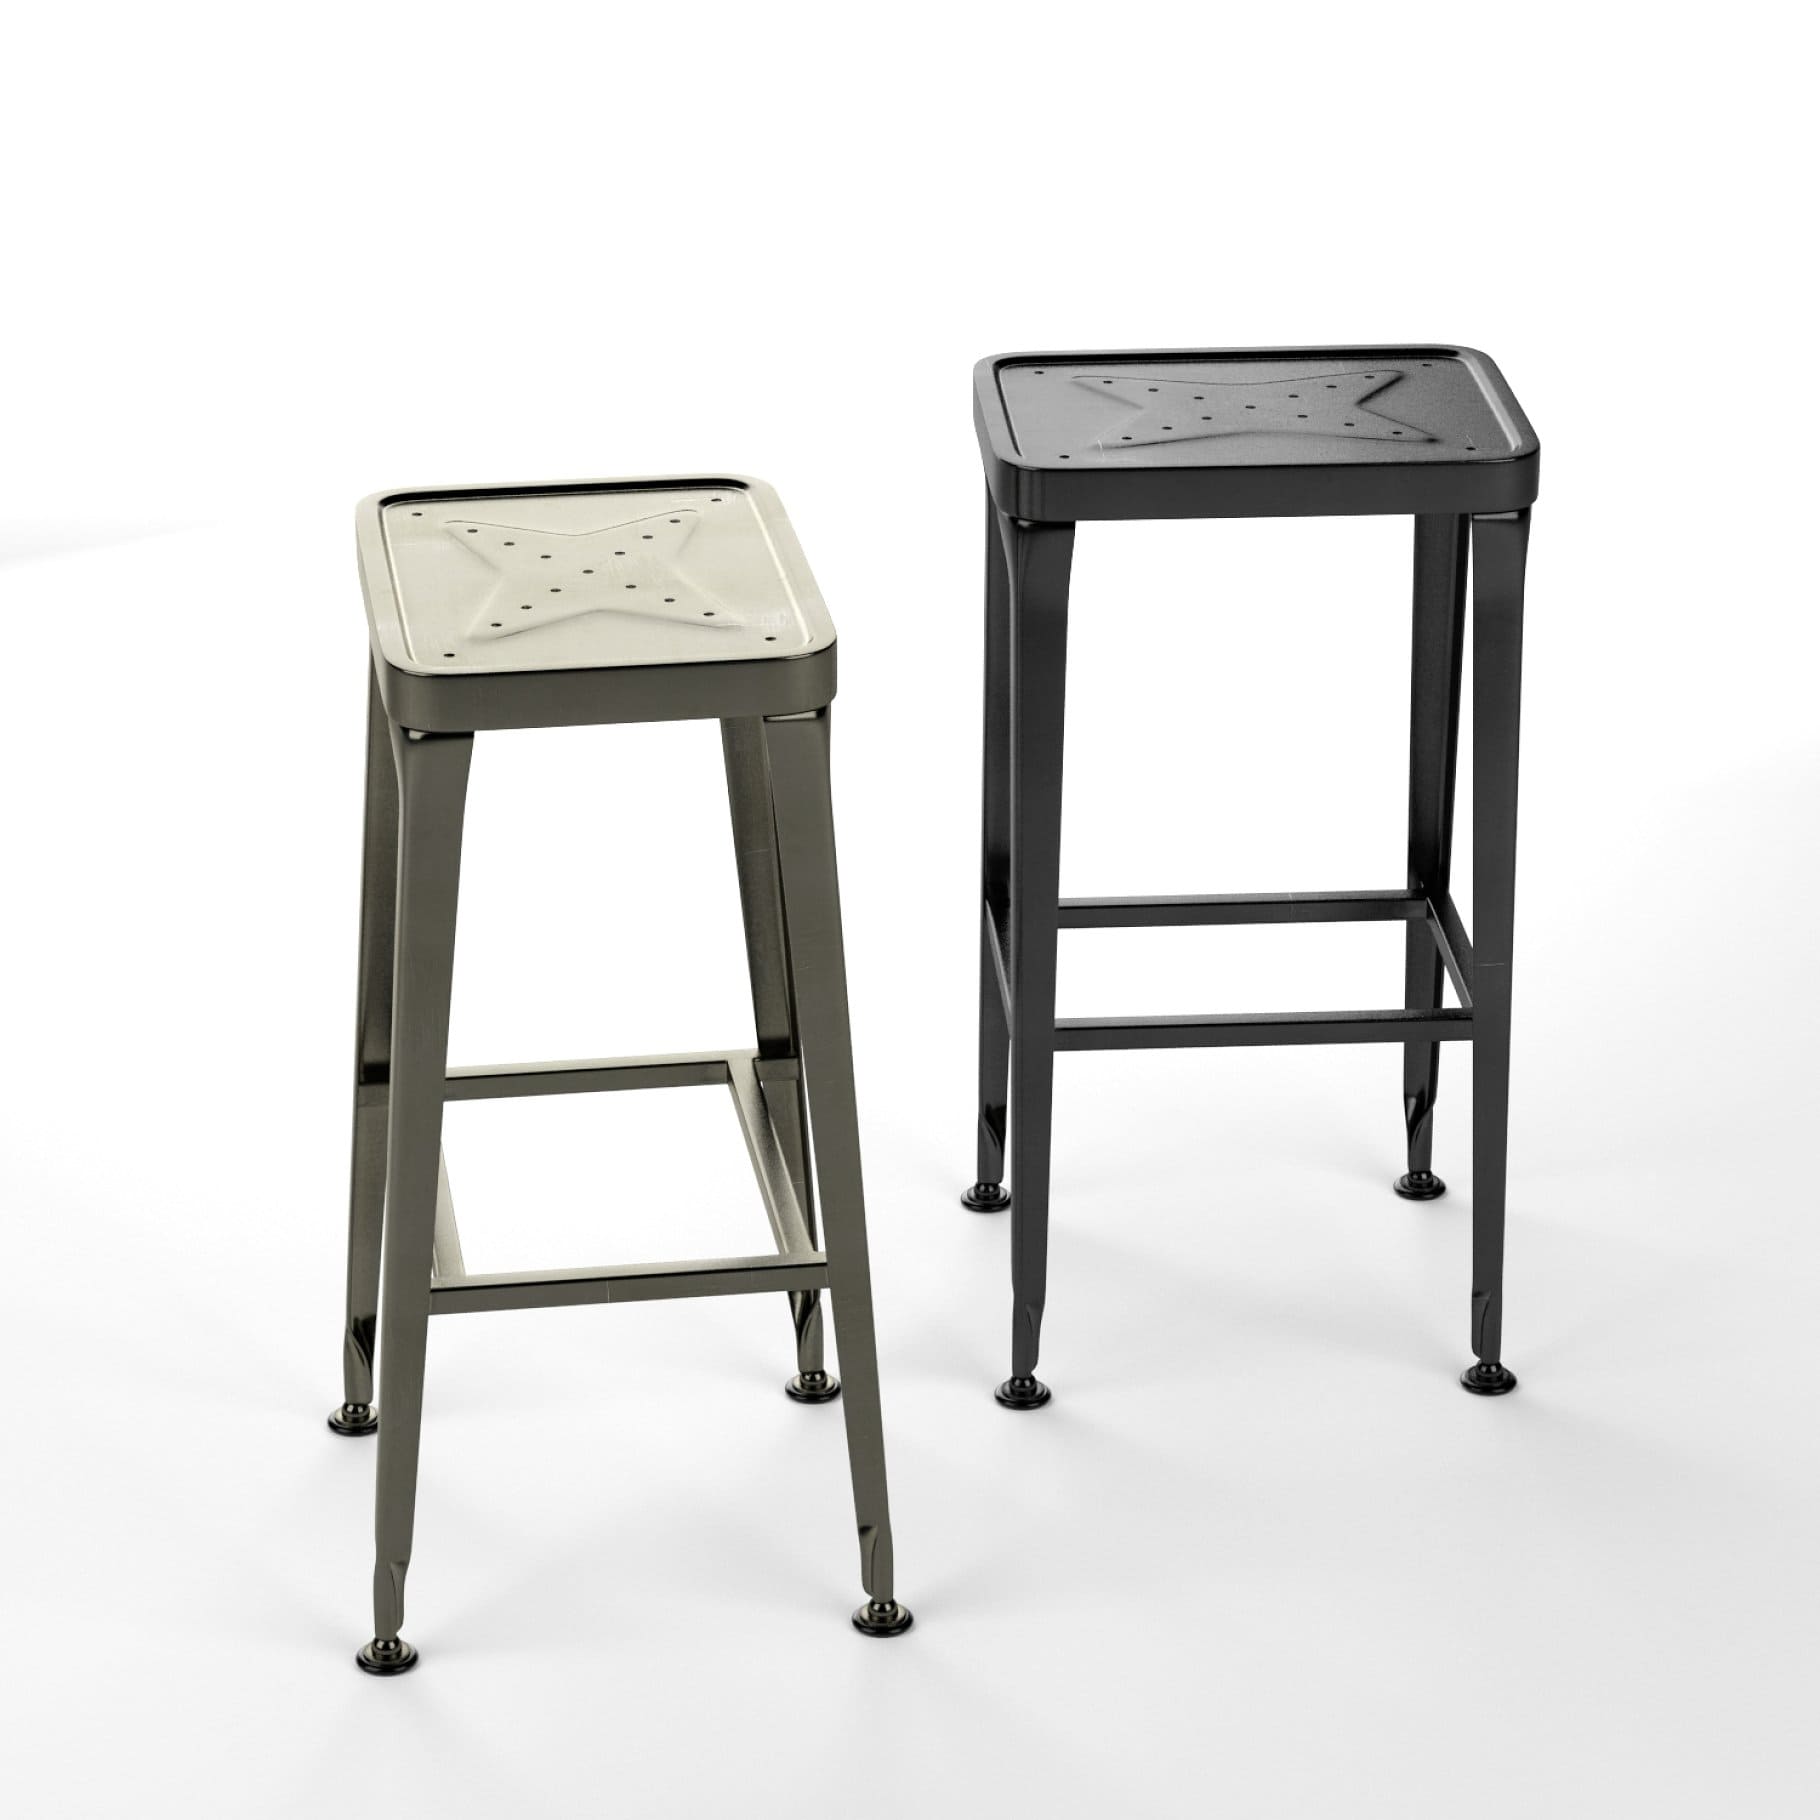 Carbon Bar Stool with holes in the seat.